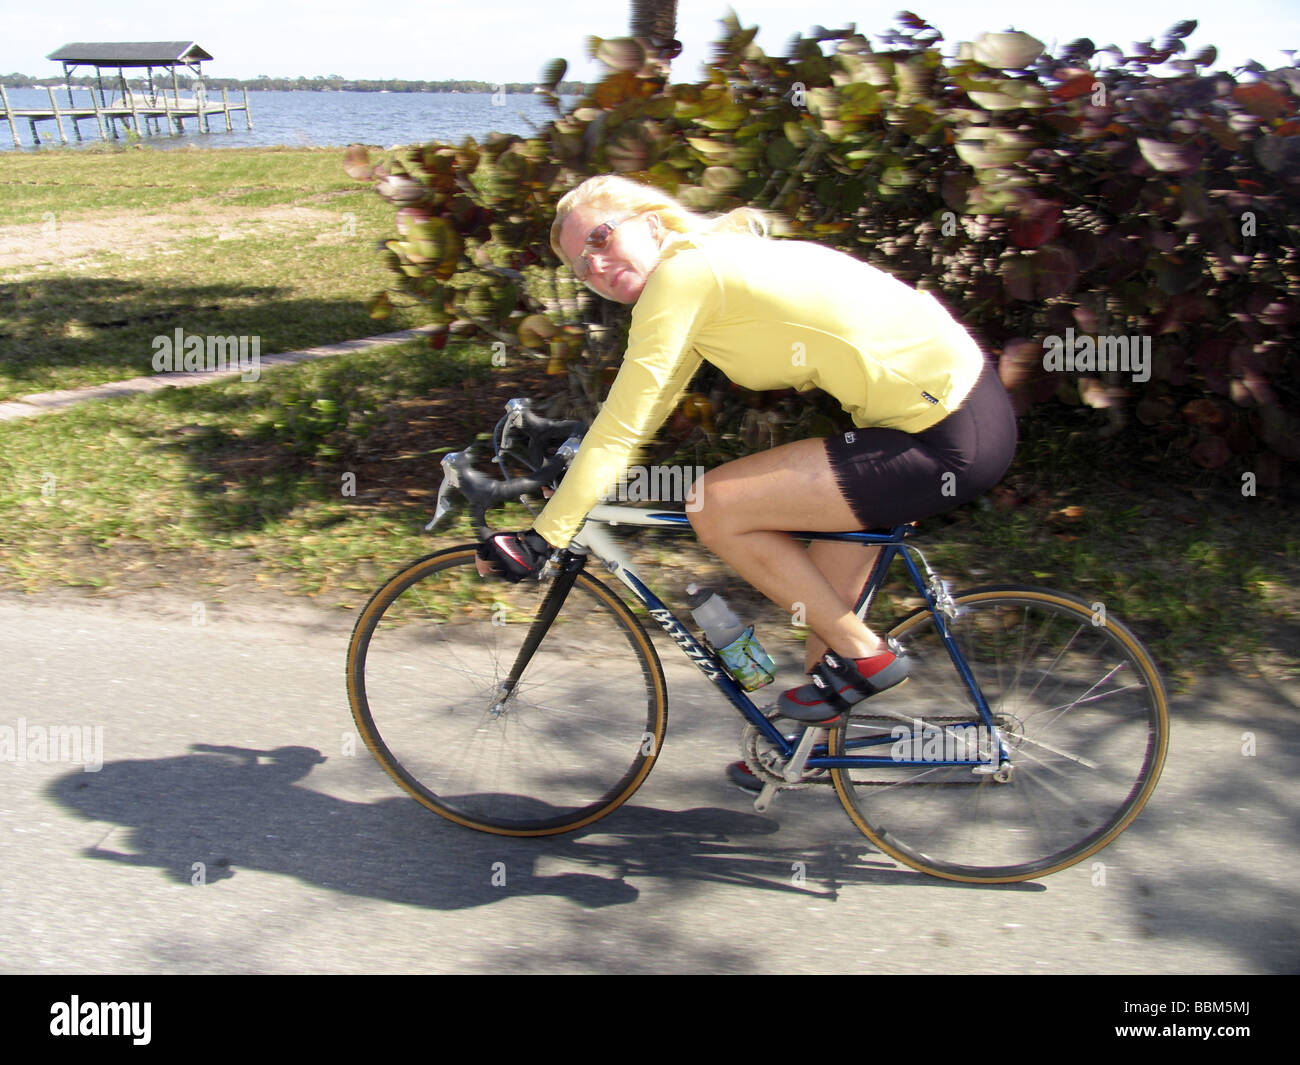 Female Cyclist riding racing bicycle. Stock Photo